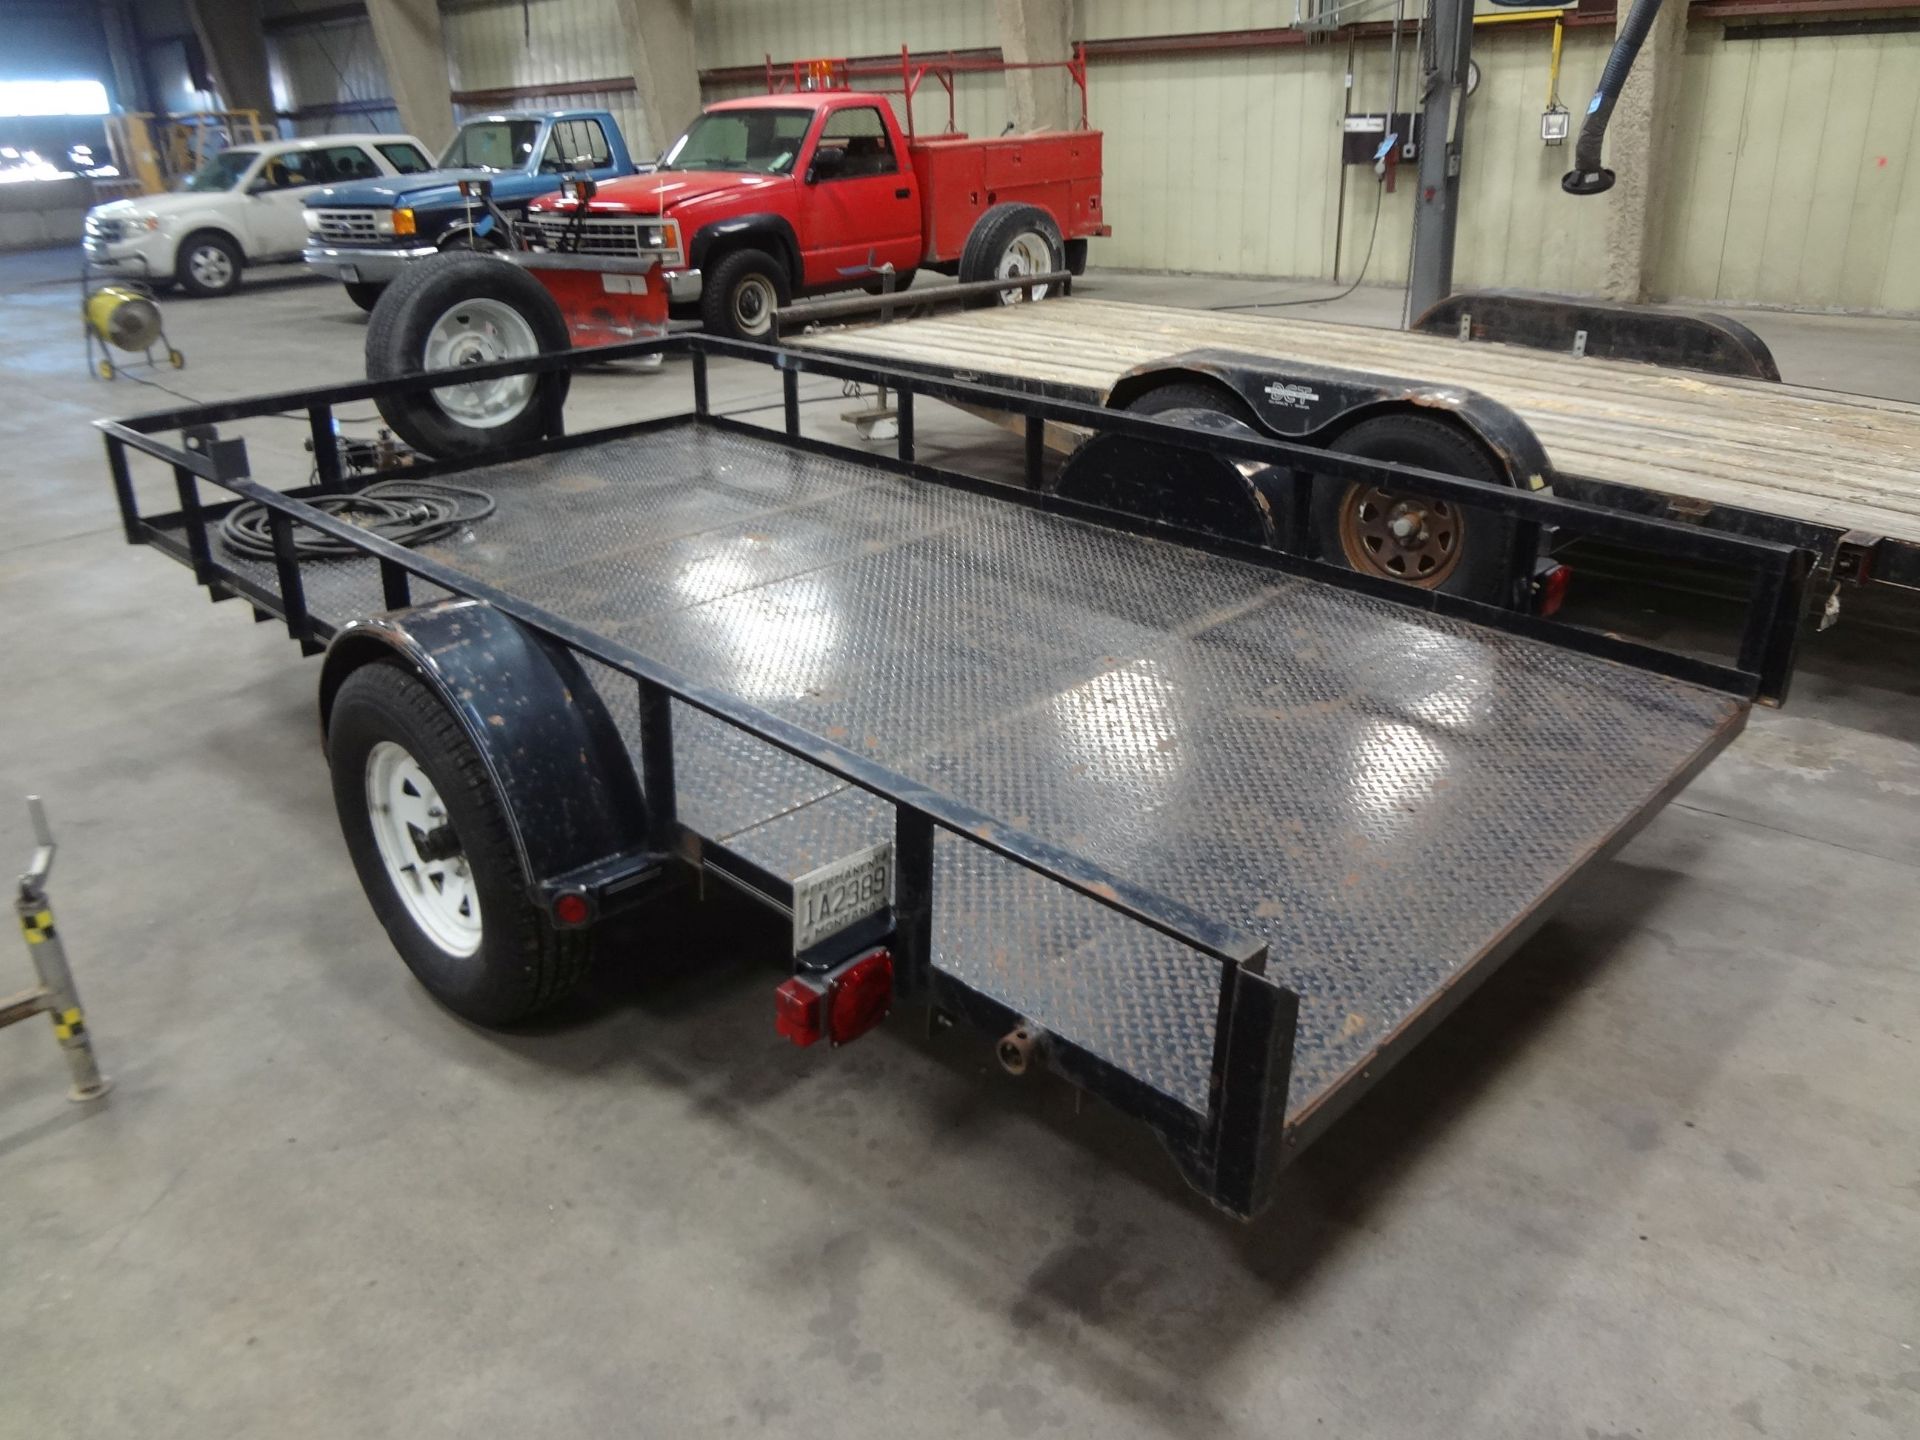 12' LOAD-TRAIL SINGLE AXEL TRAILER, 2" BALL HITCH, STEEL DECK - Image 3 of 4